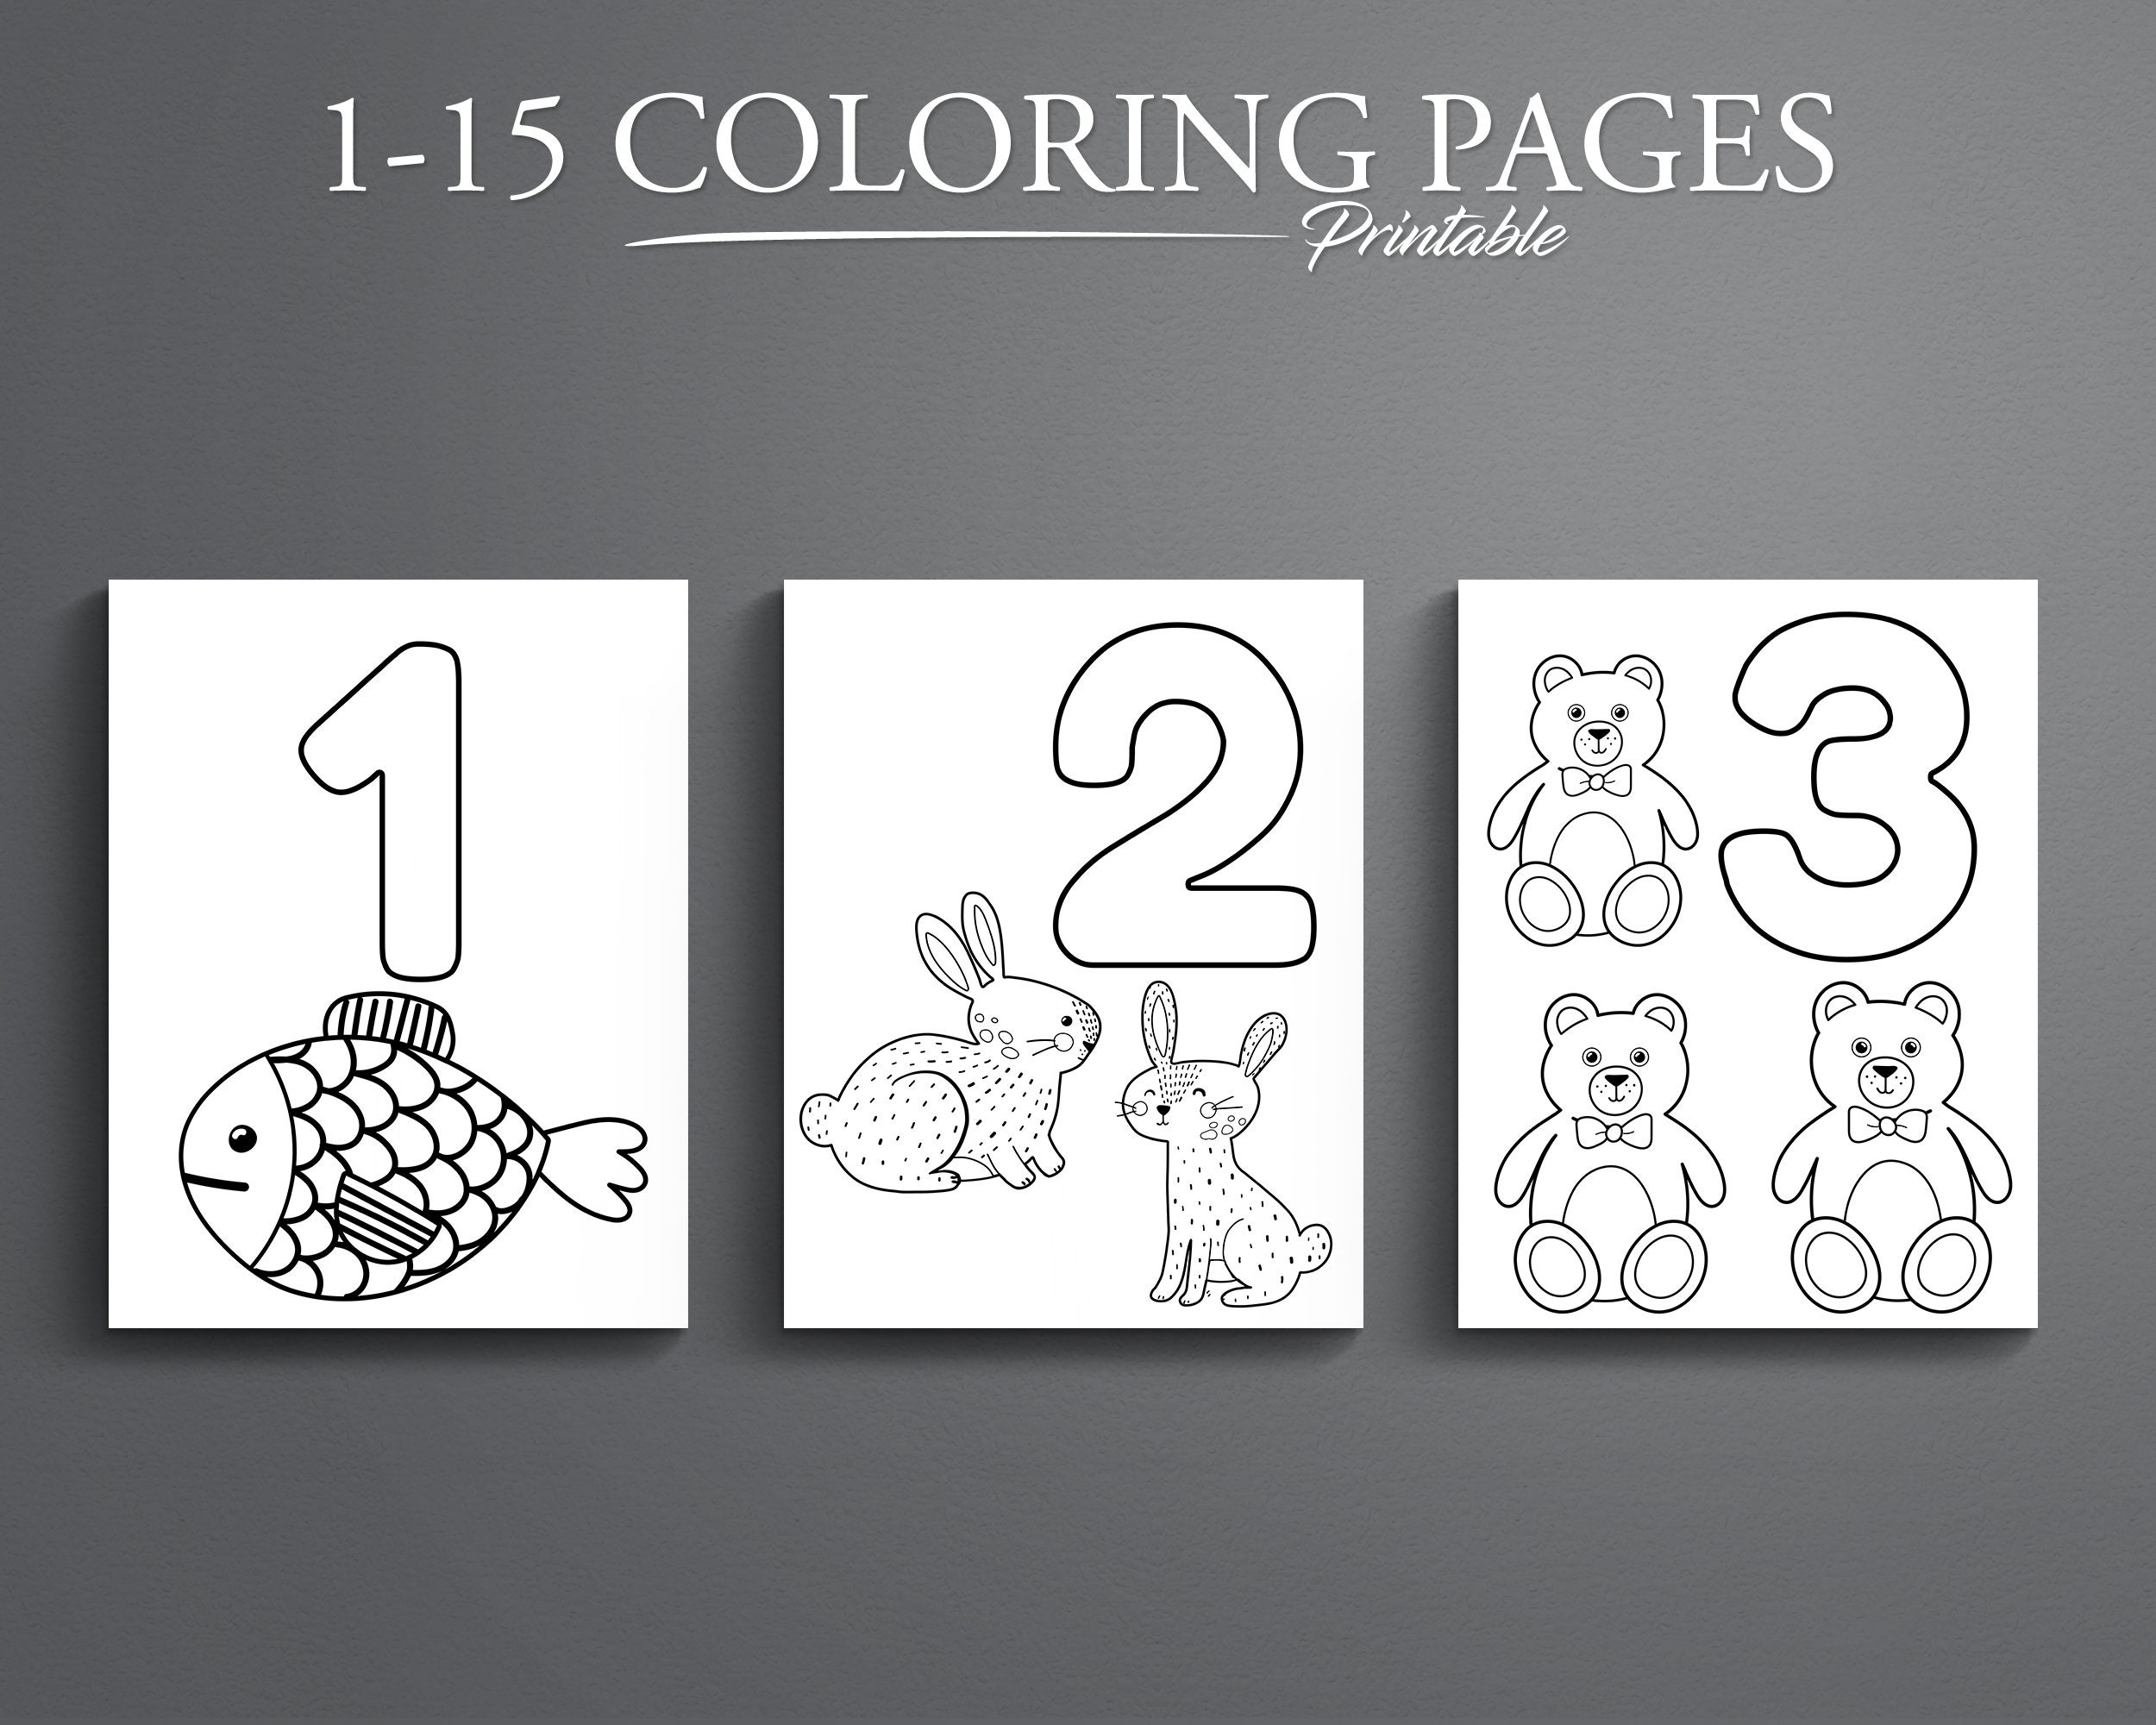 15 fun Paint by numbers worksheets to download and color in